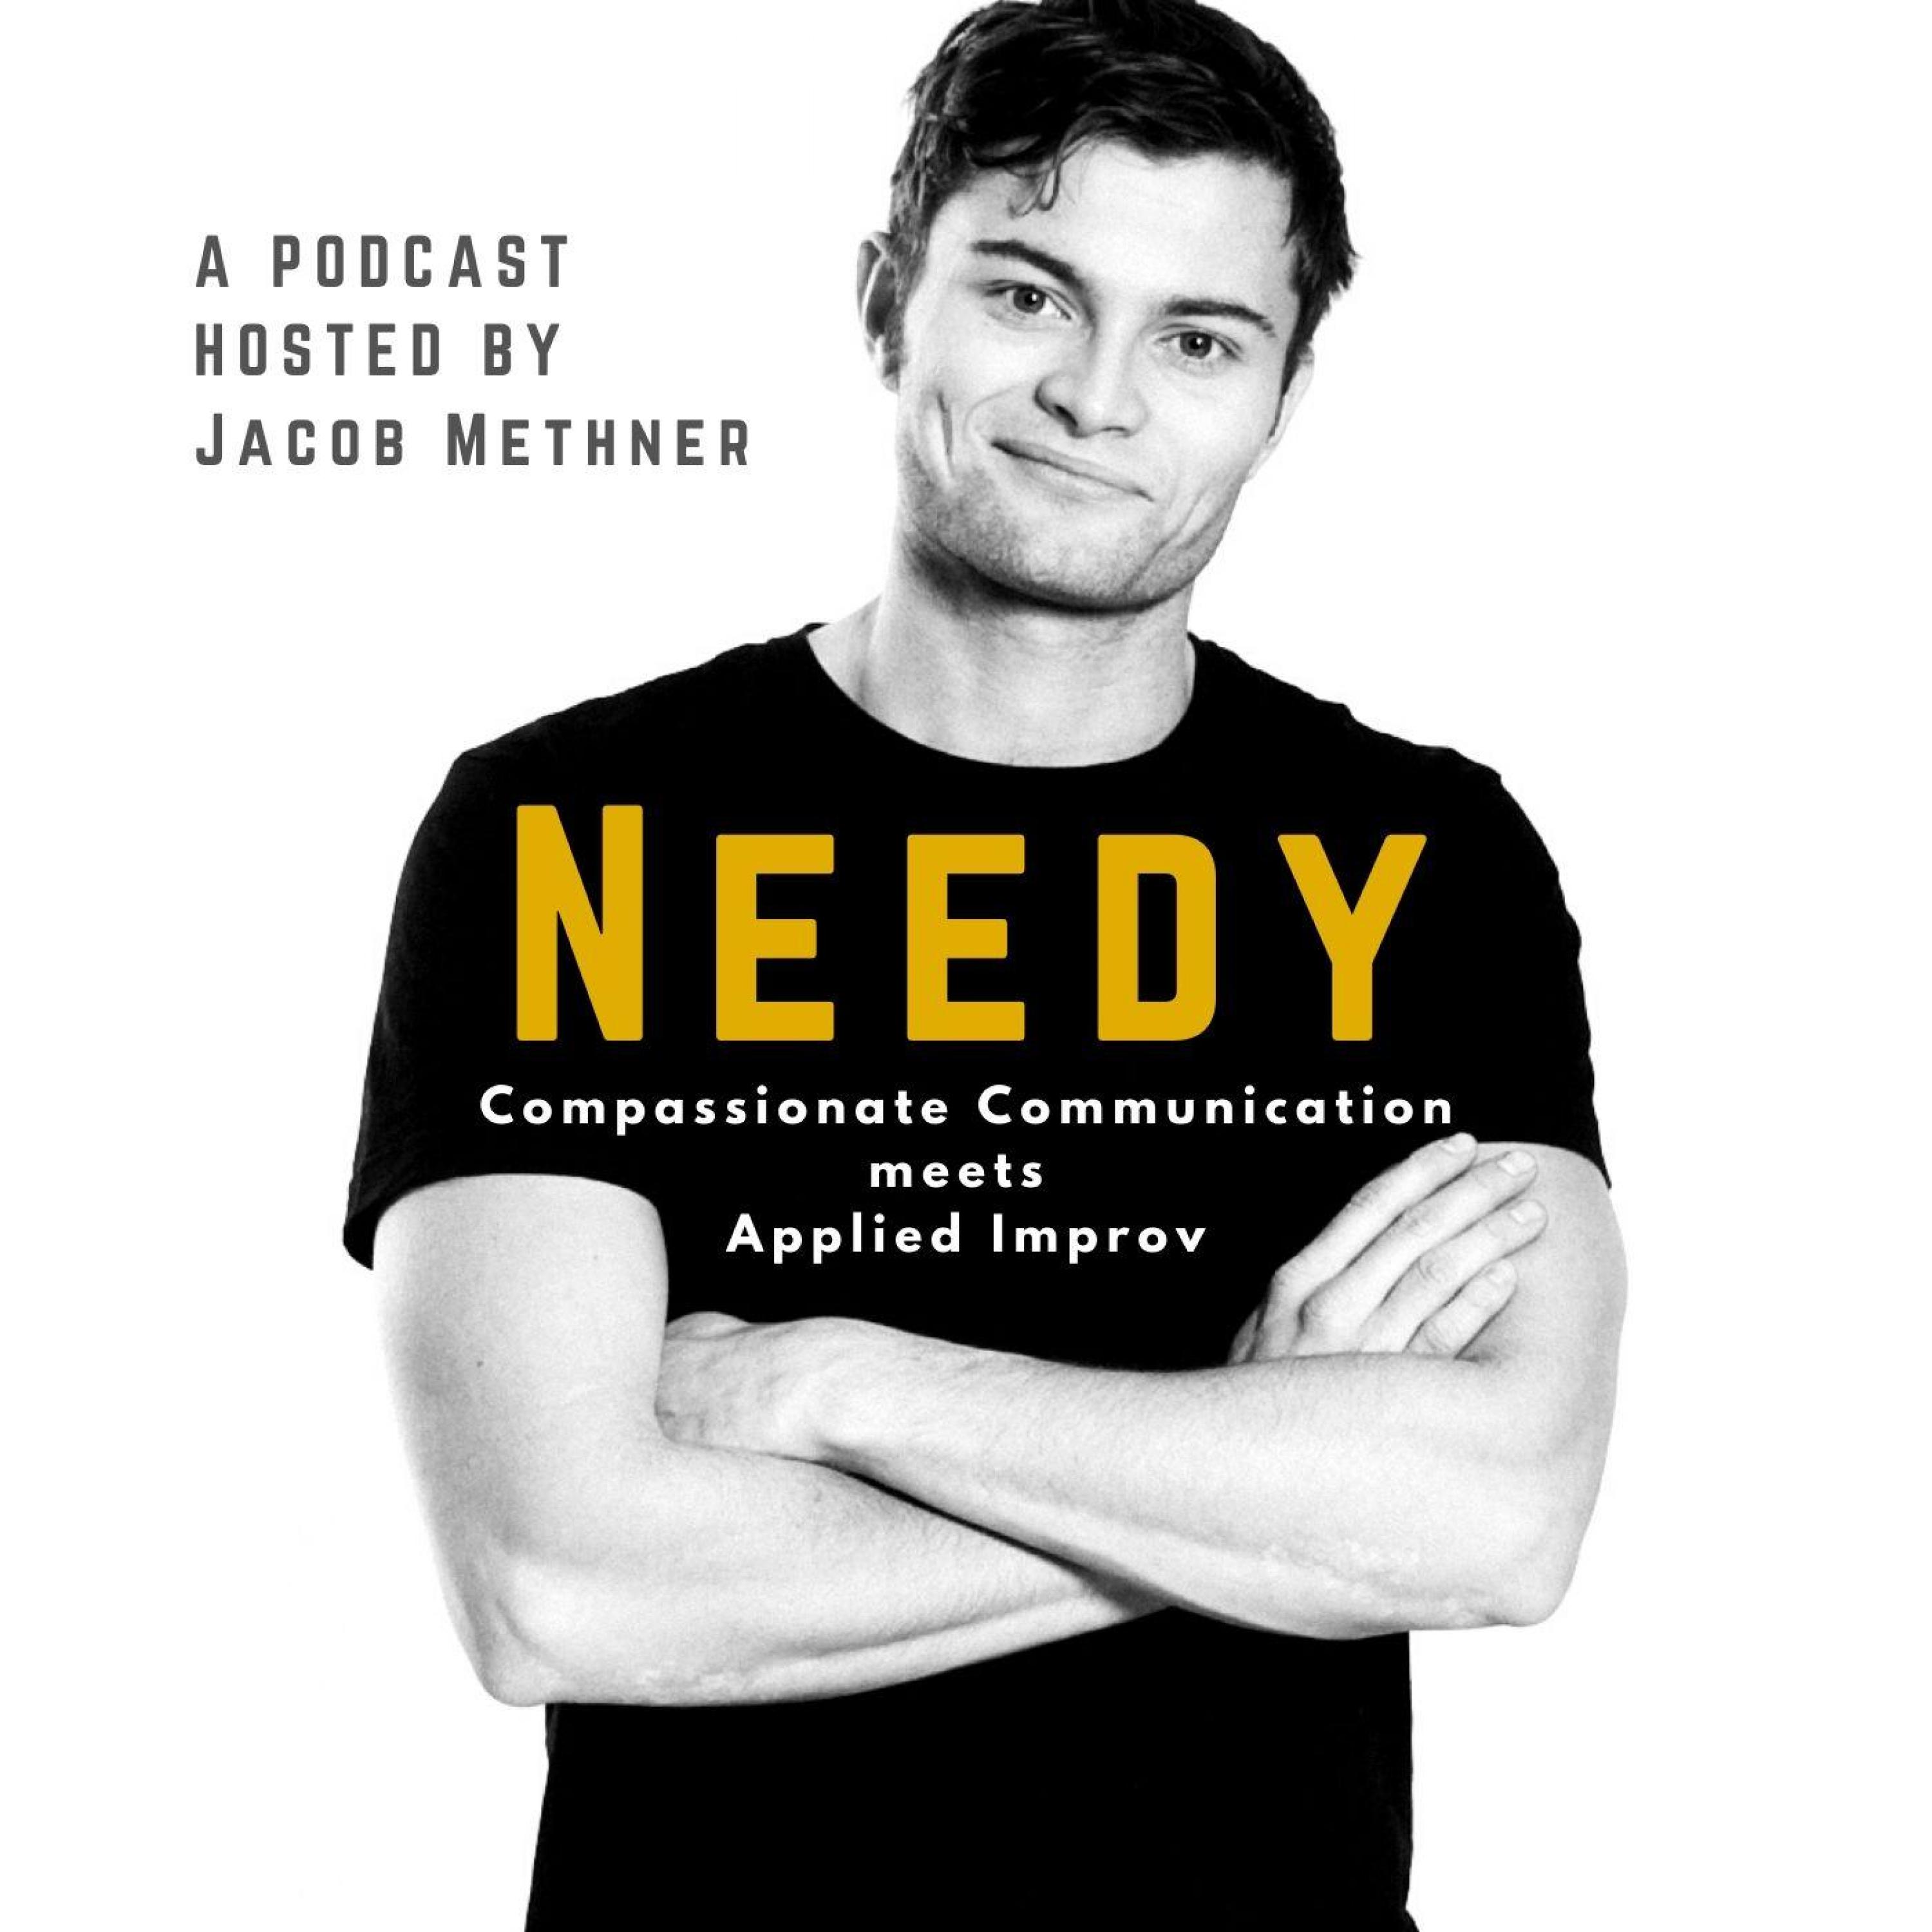 Needy - Compassionate Communication meets Applied Improv